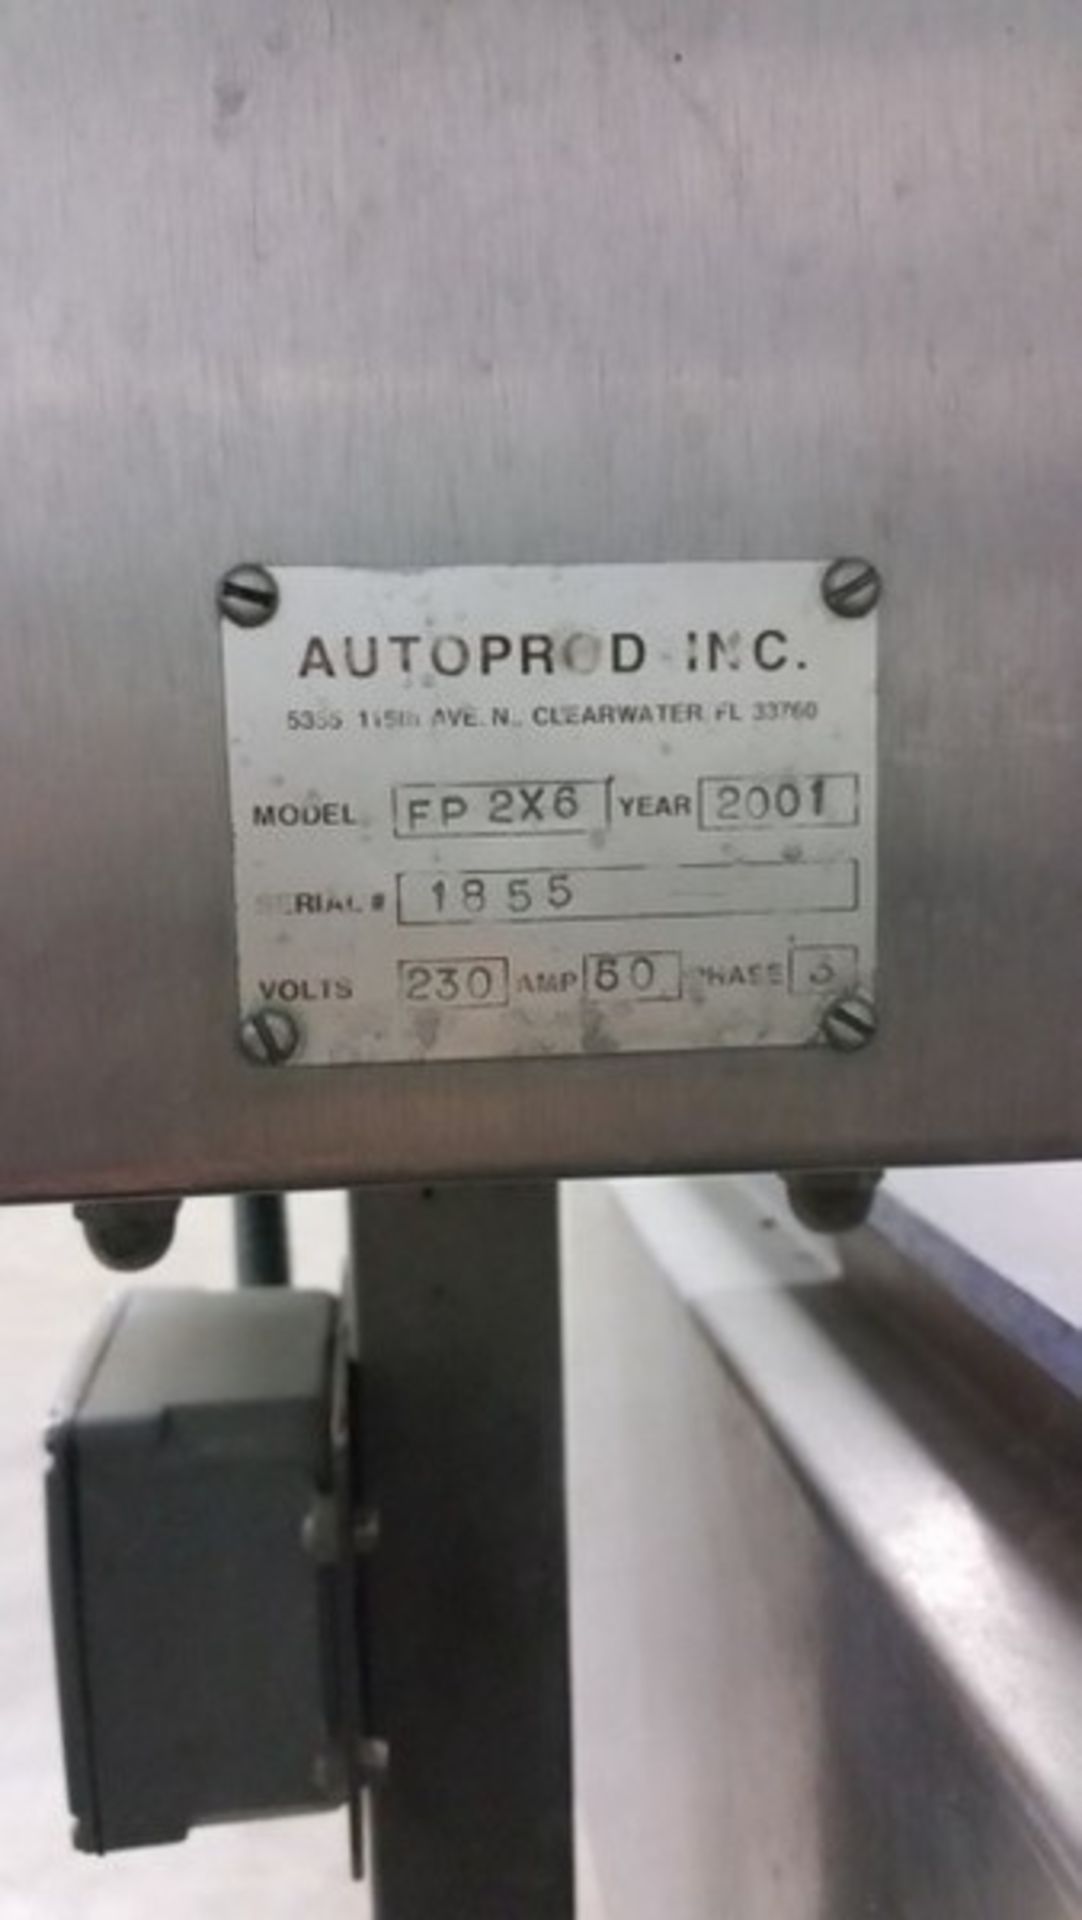 Autoprod FP 2X6 Inline Cup Filler, Model FP 2X6, S/N 1855, Year Built 2001 (Loading Fee $550) ( - Image 2 of 7